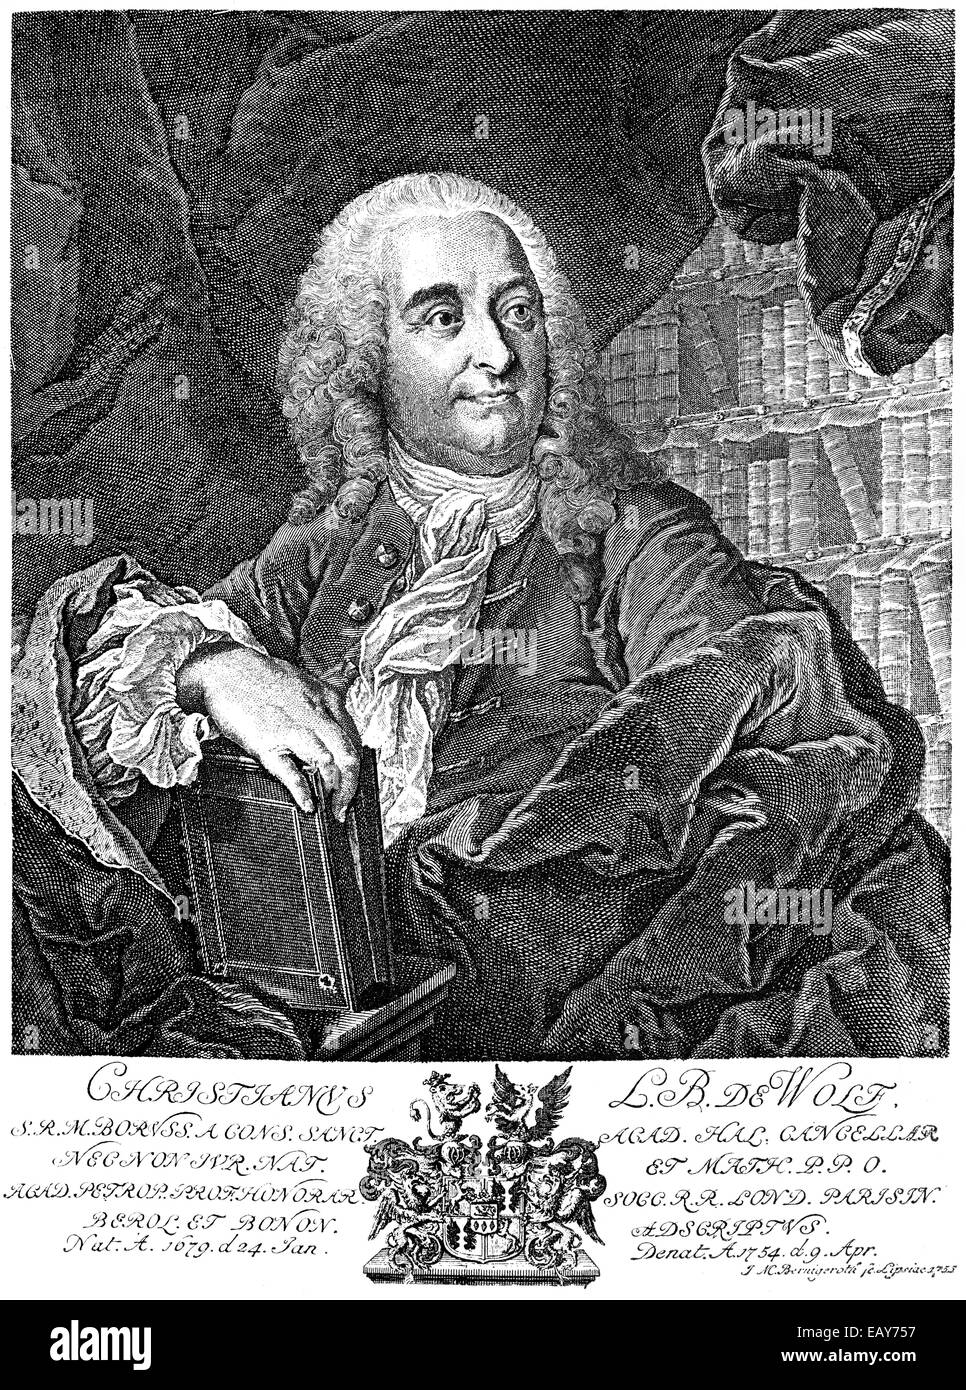 Christian Freiherr von Wolff or Chrétien Wolf, 1679 - 1754, German polymath, lawyer, mathematician and philosopher of the Enligh Stock Photo